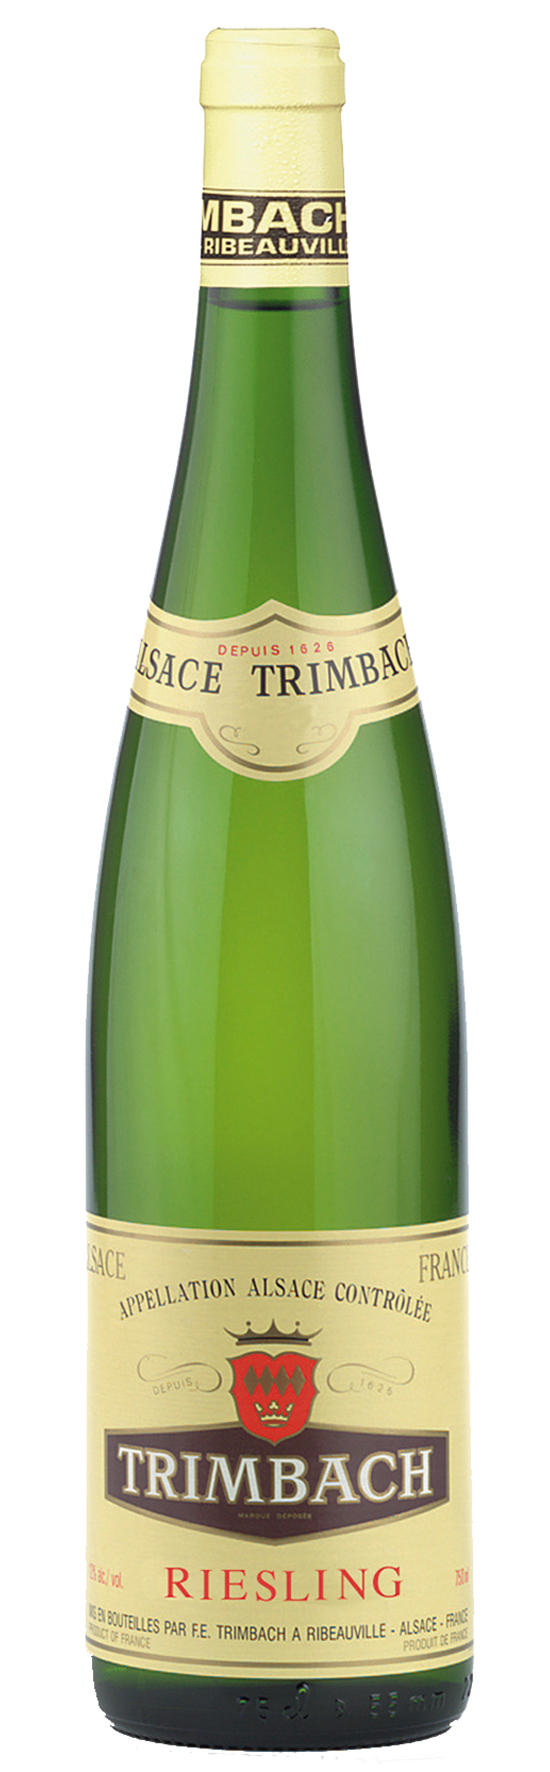 Riesling Trimbach